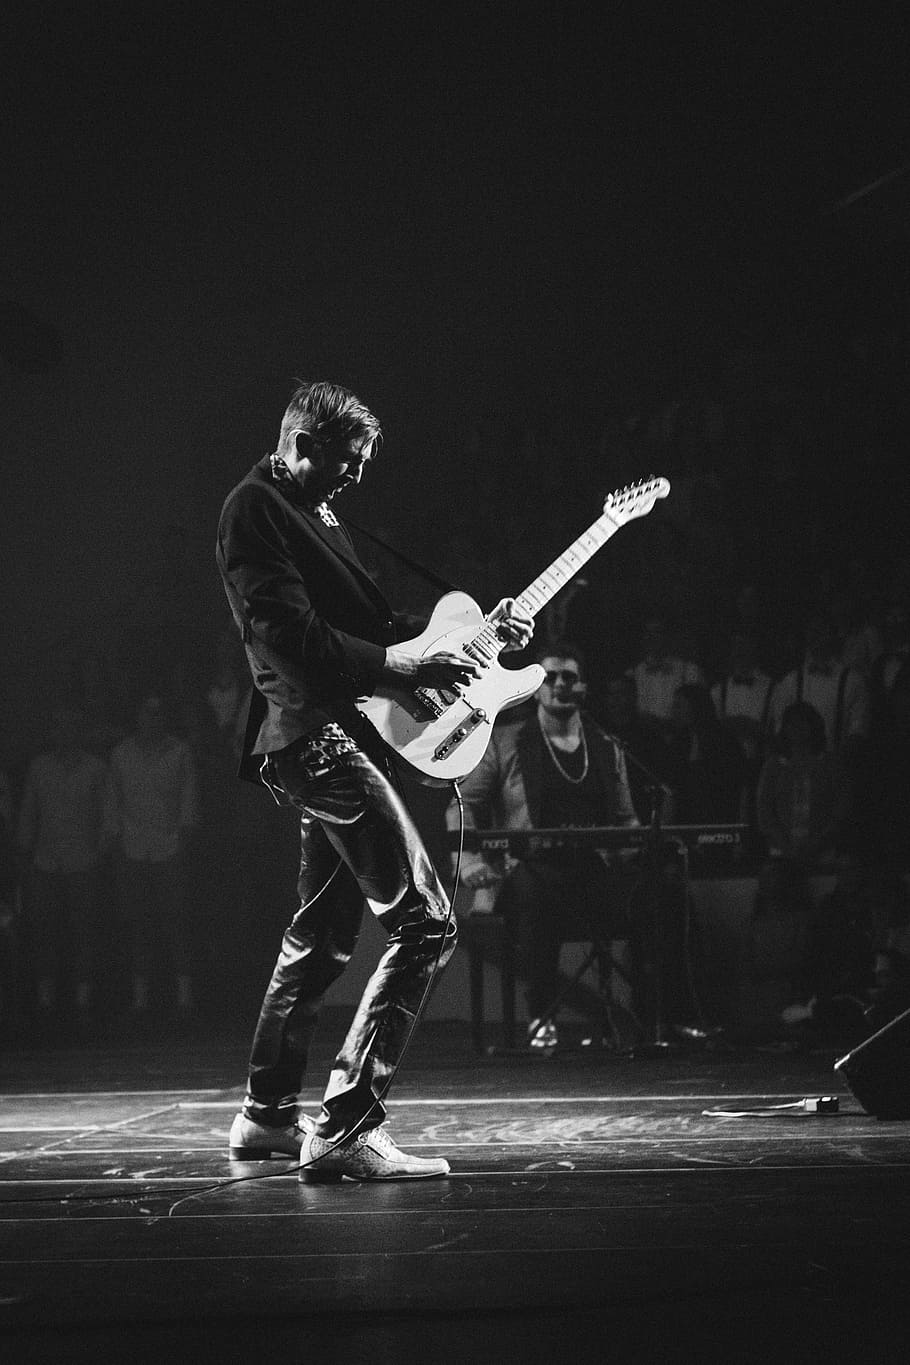 grayscale photography of man playing electric guitar near man playing electric keyboard, man holding guitar standing on stage